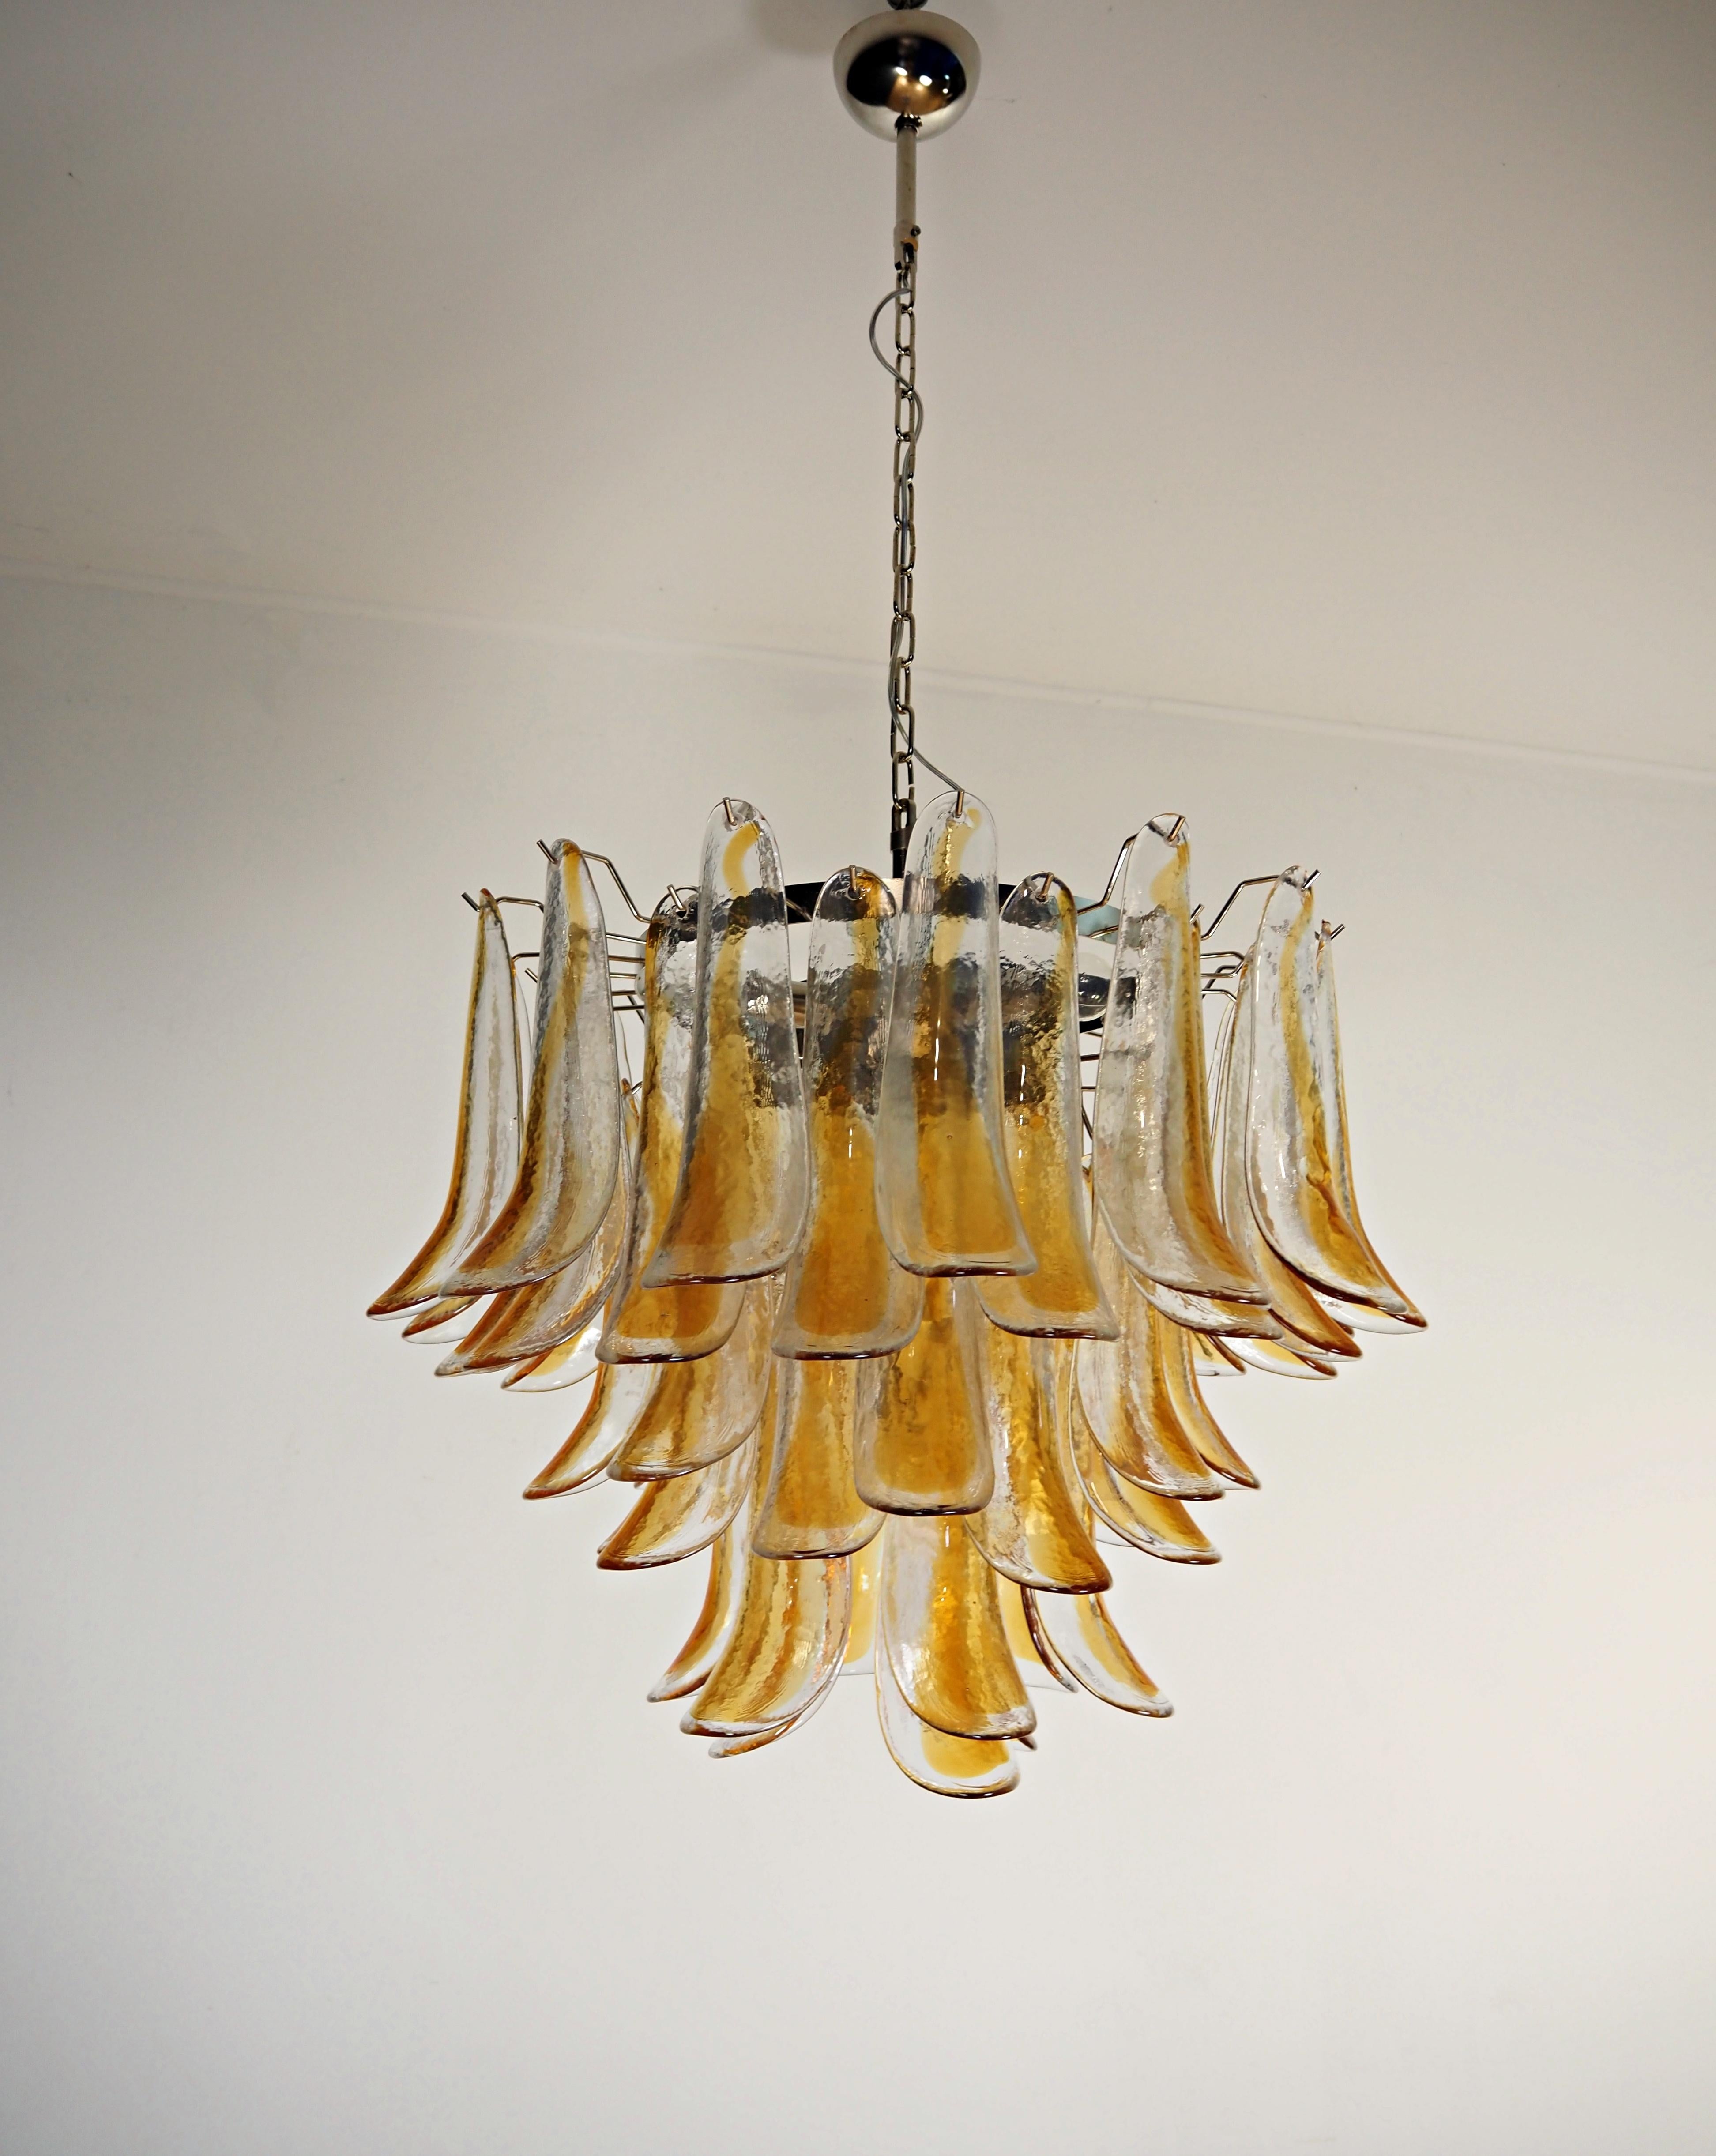 Murano Italian glass chandelier. Fantastic chandelier with 53 fantastic glass petals (clear with amber spot), nickel-plated metal frame. The glasses are very high quality, the photos do not do the beauty, luster of these glasses.
Period: 	late xx